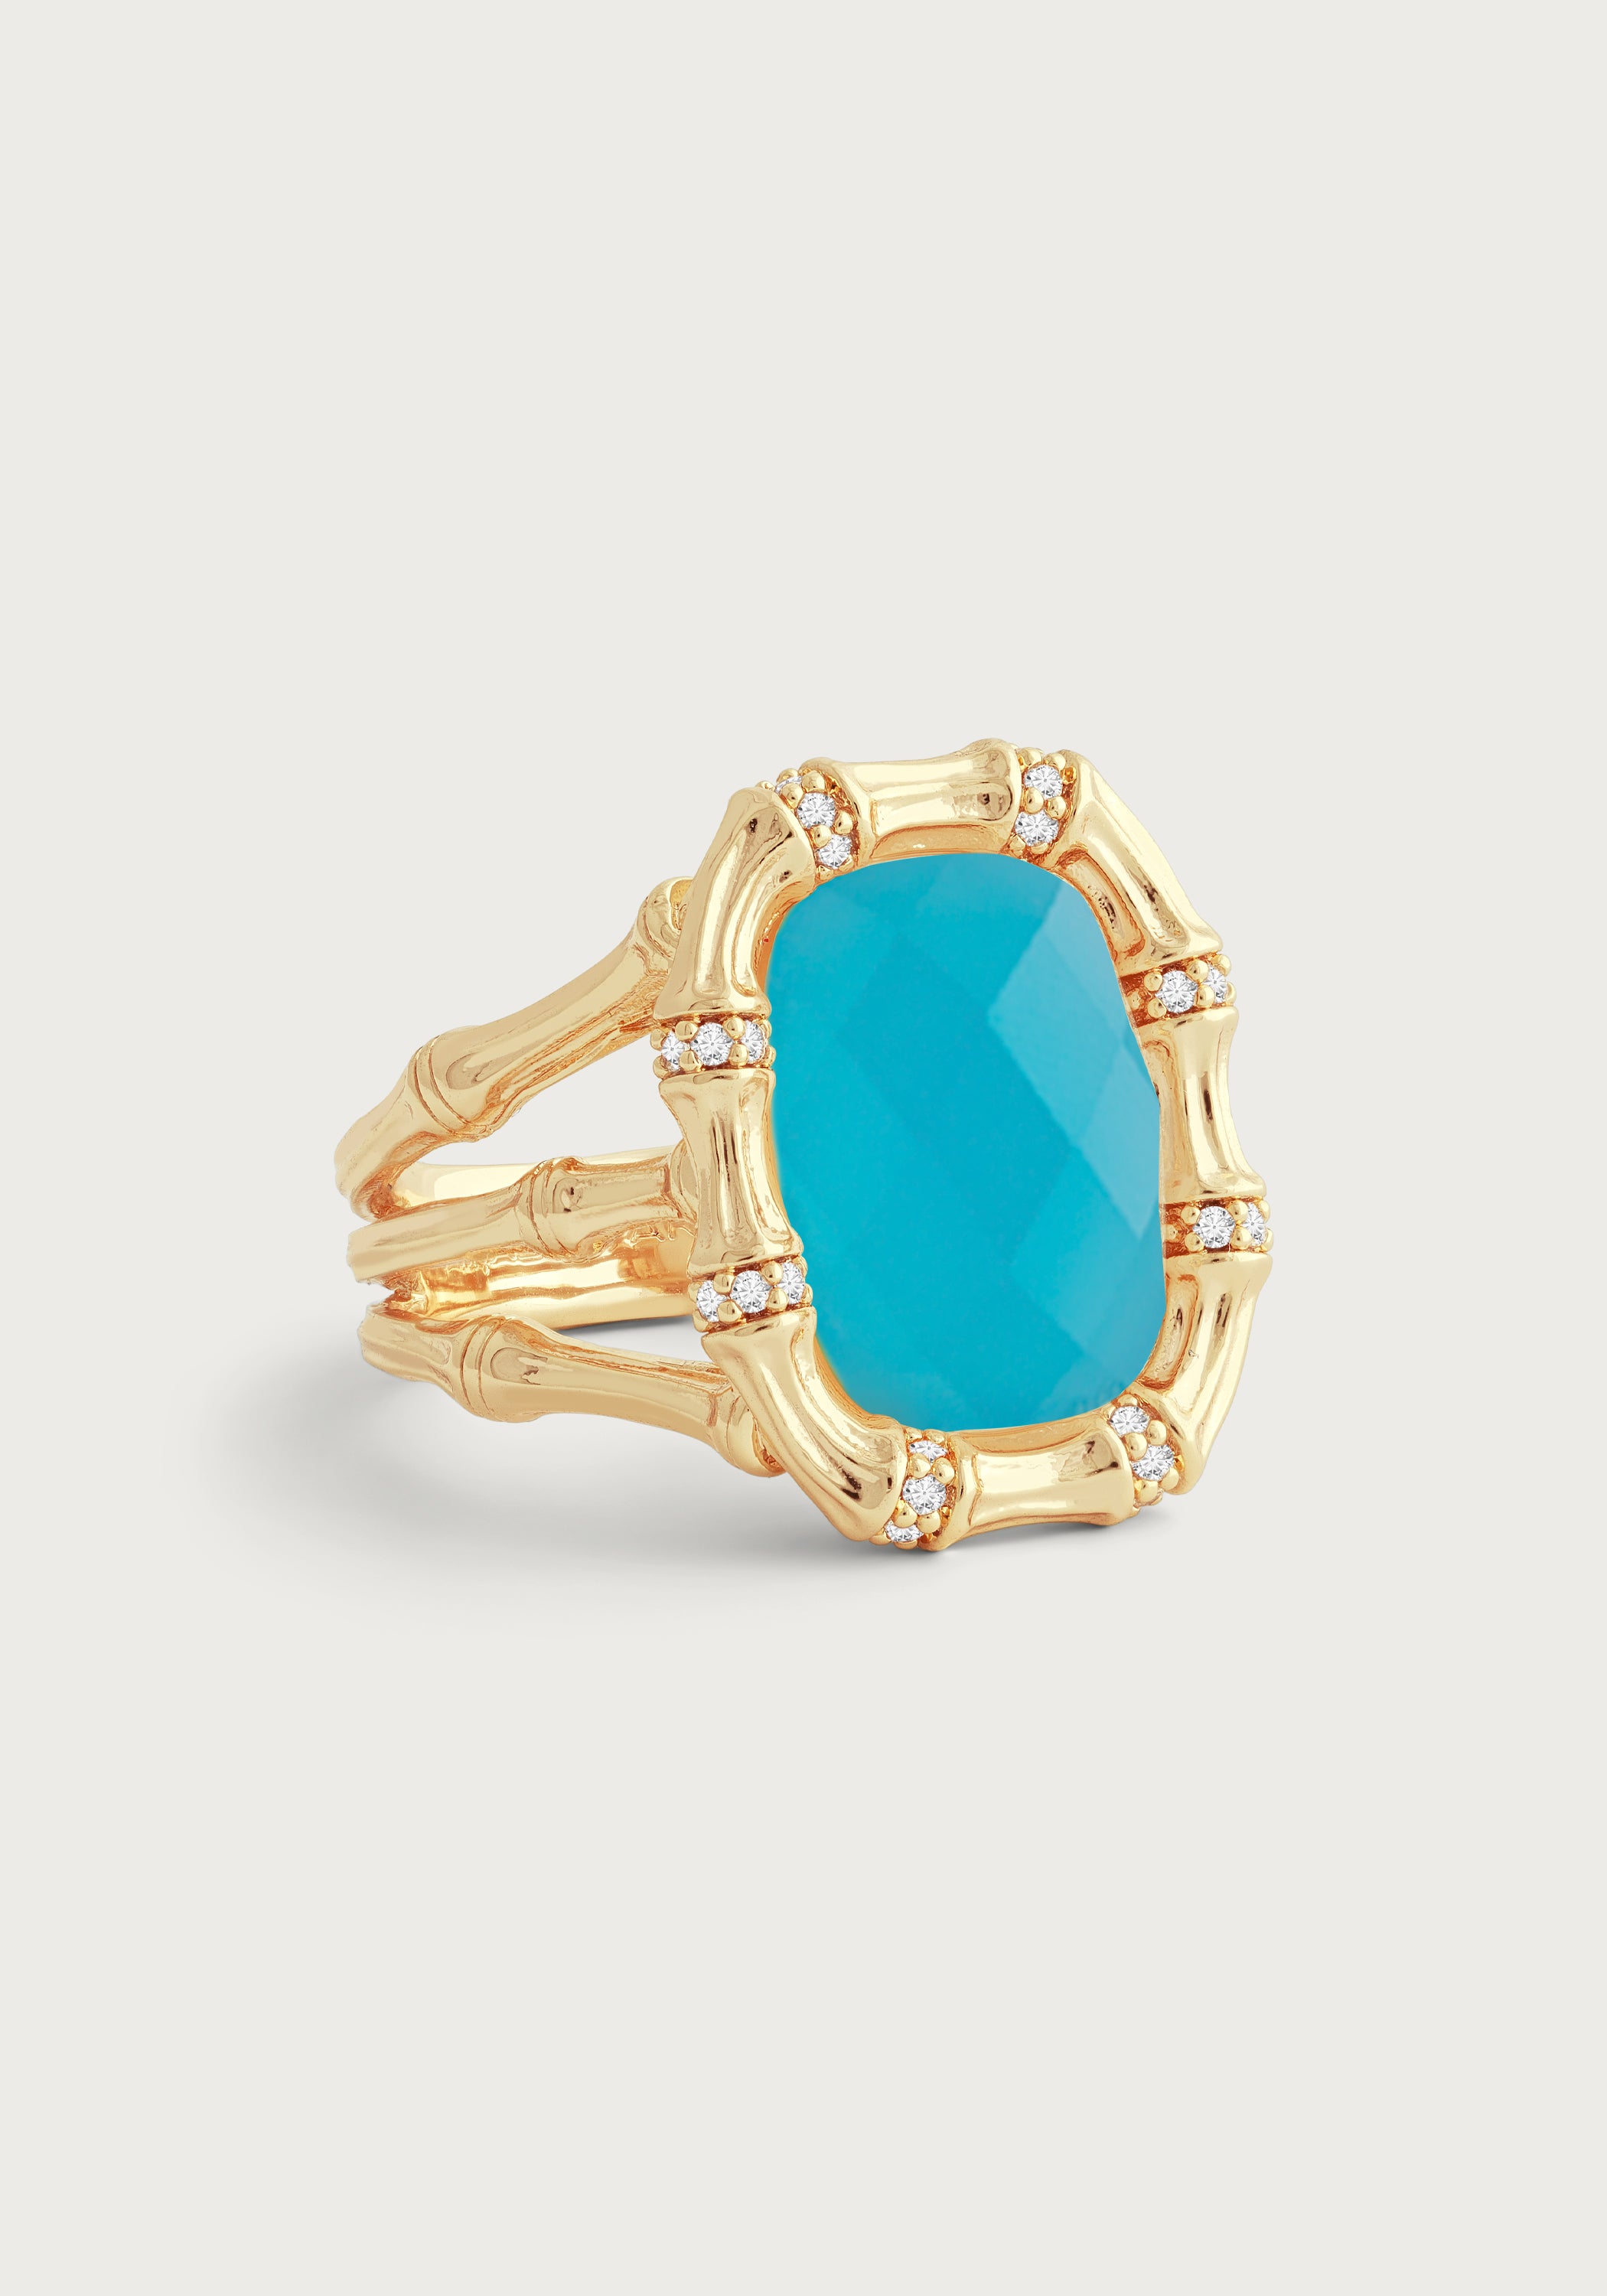 Bamboo With Stone Ring - Gemstones